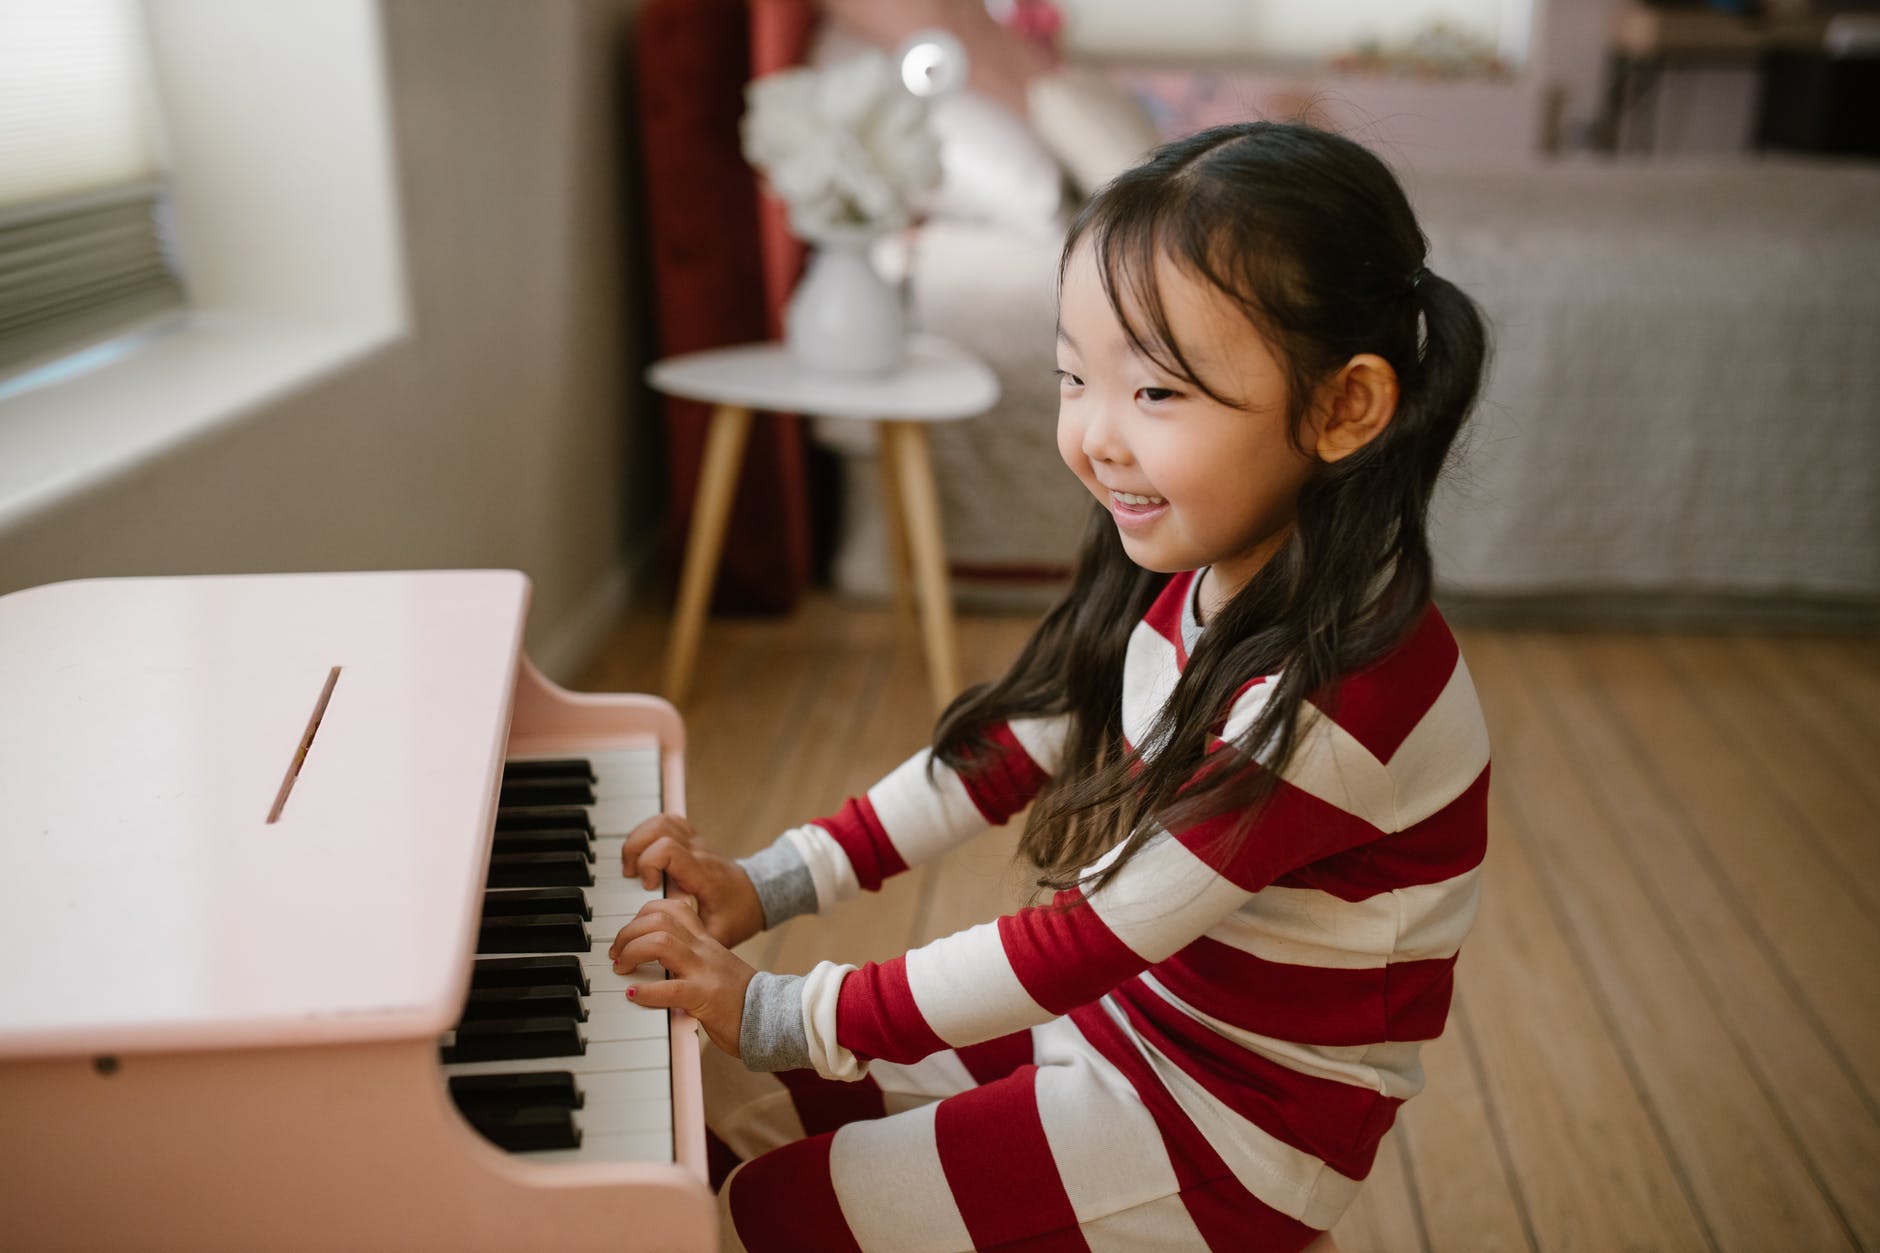 smiling child playing toy piano